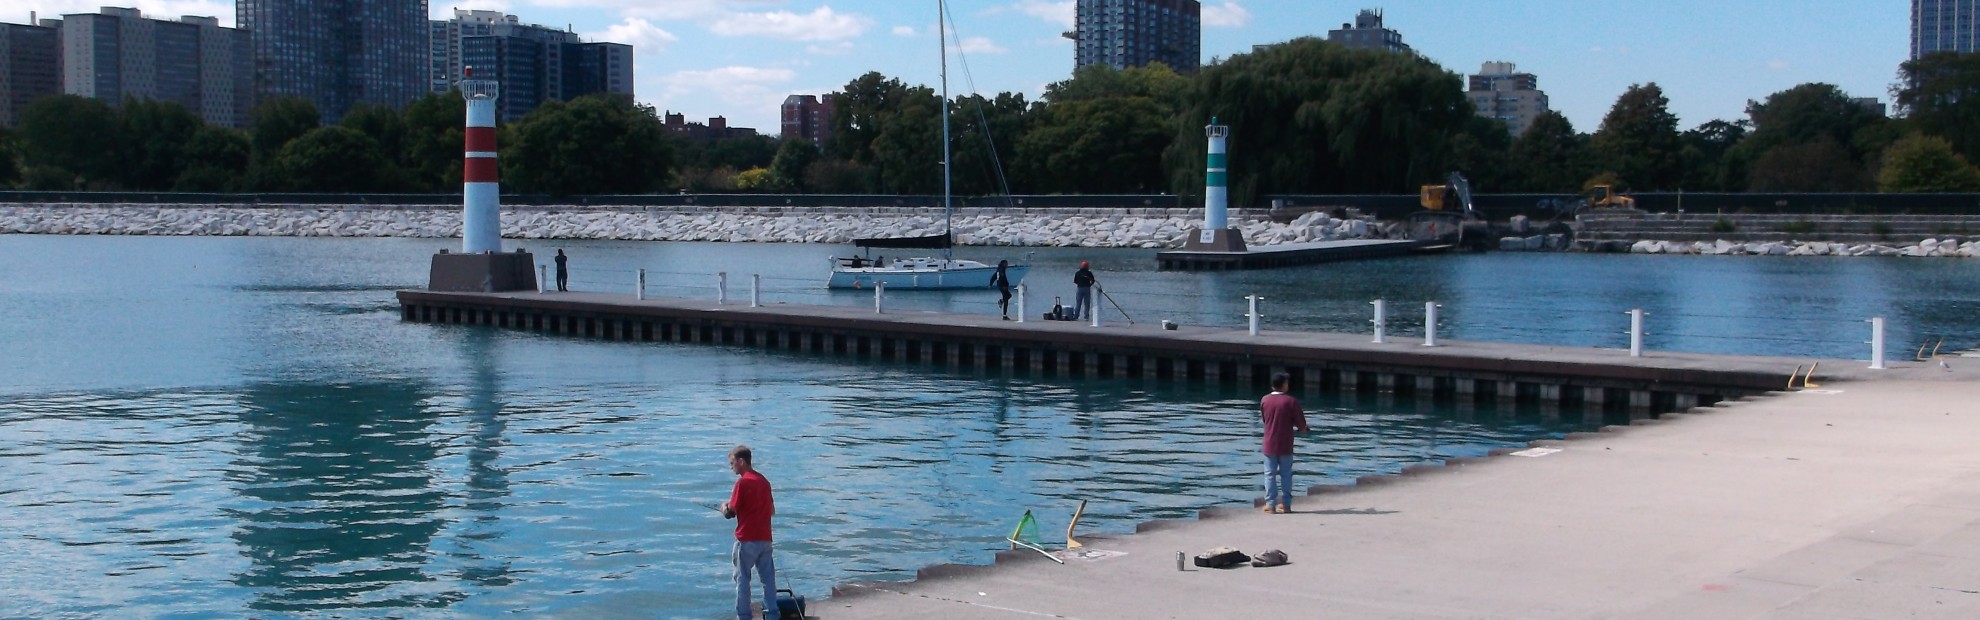 Live Bait Shop at Montrose Harbor a Relic of Chicago's Fishing Heyday, Chicago News